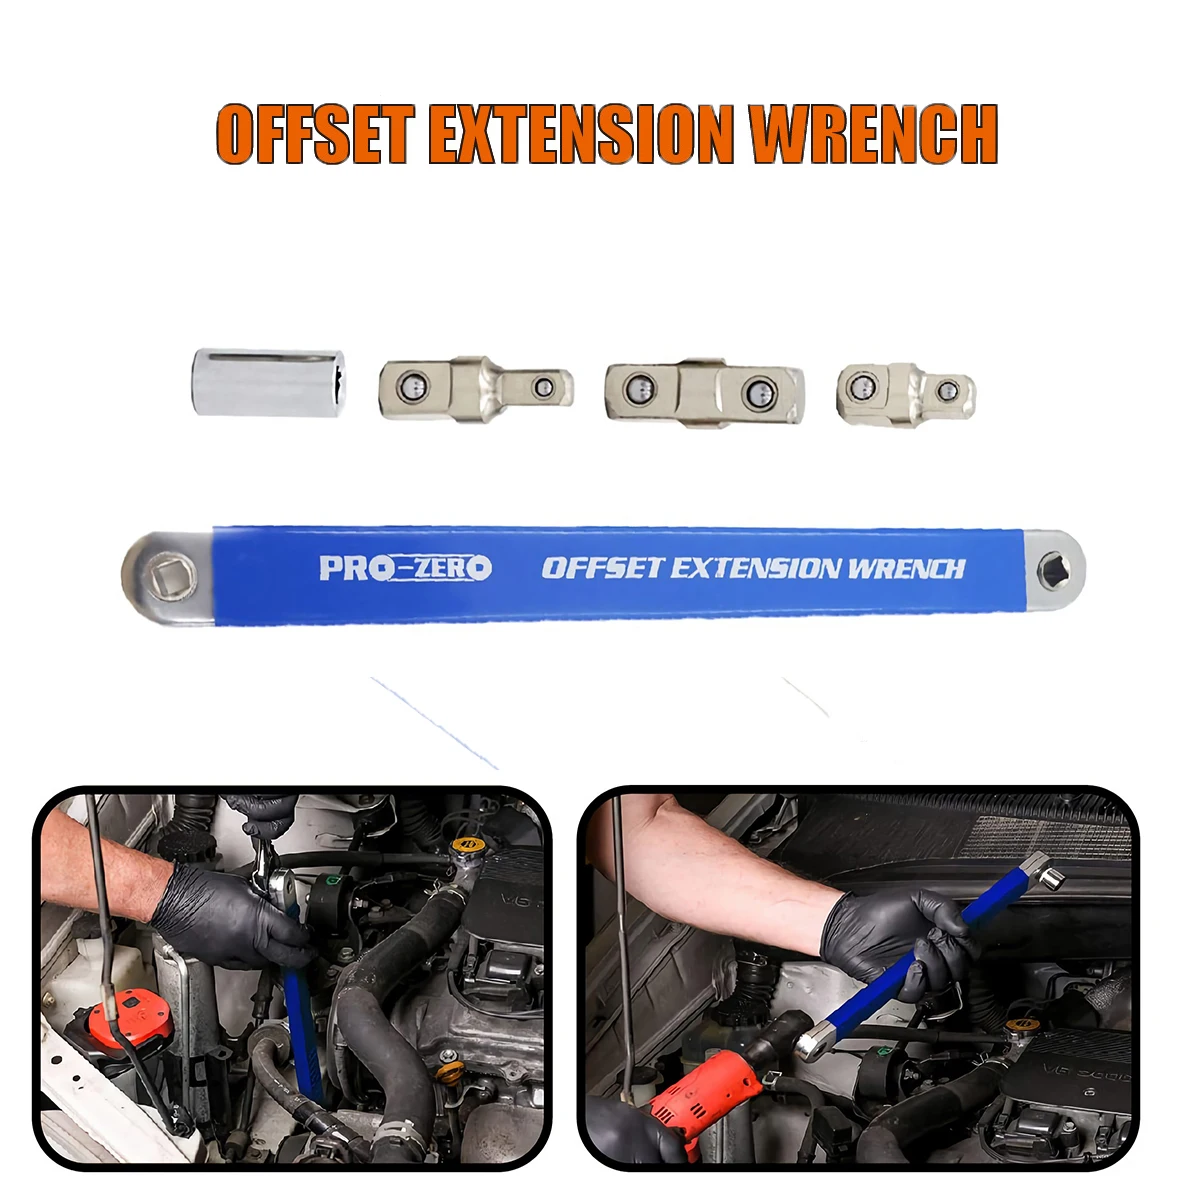 Extension Wrench Universal Multitool Compact Offset Extension Wrench Automotive Metal 39cm Works With Socket Ratchet Impact